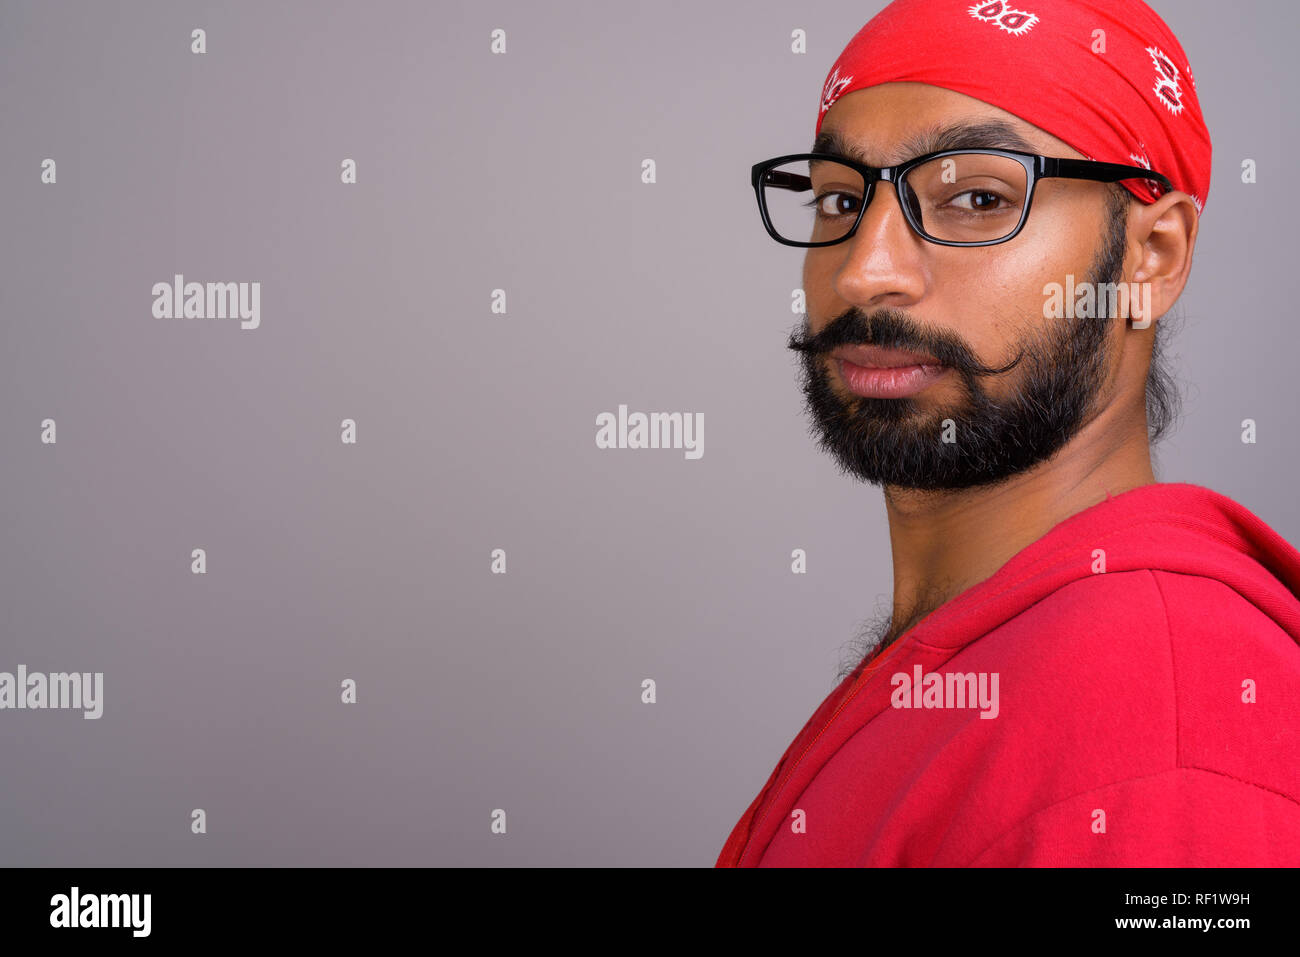 Portrait of young handsome Indian man wearing red shirt Stock Photo